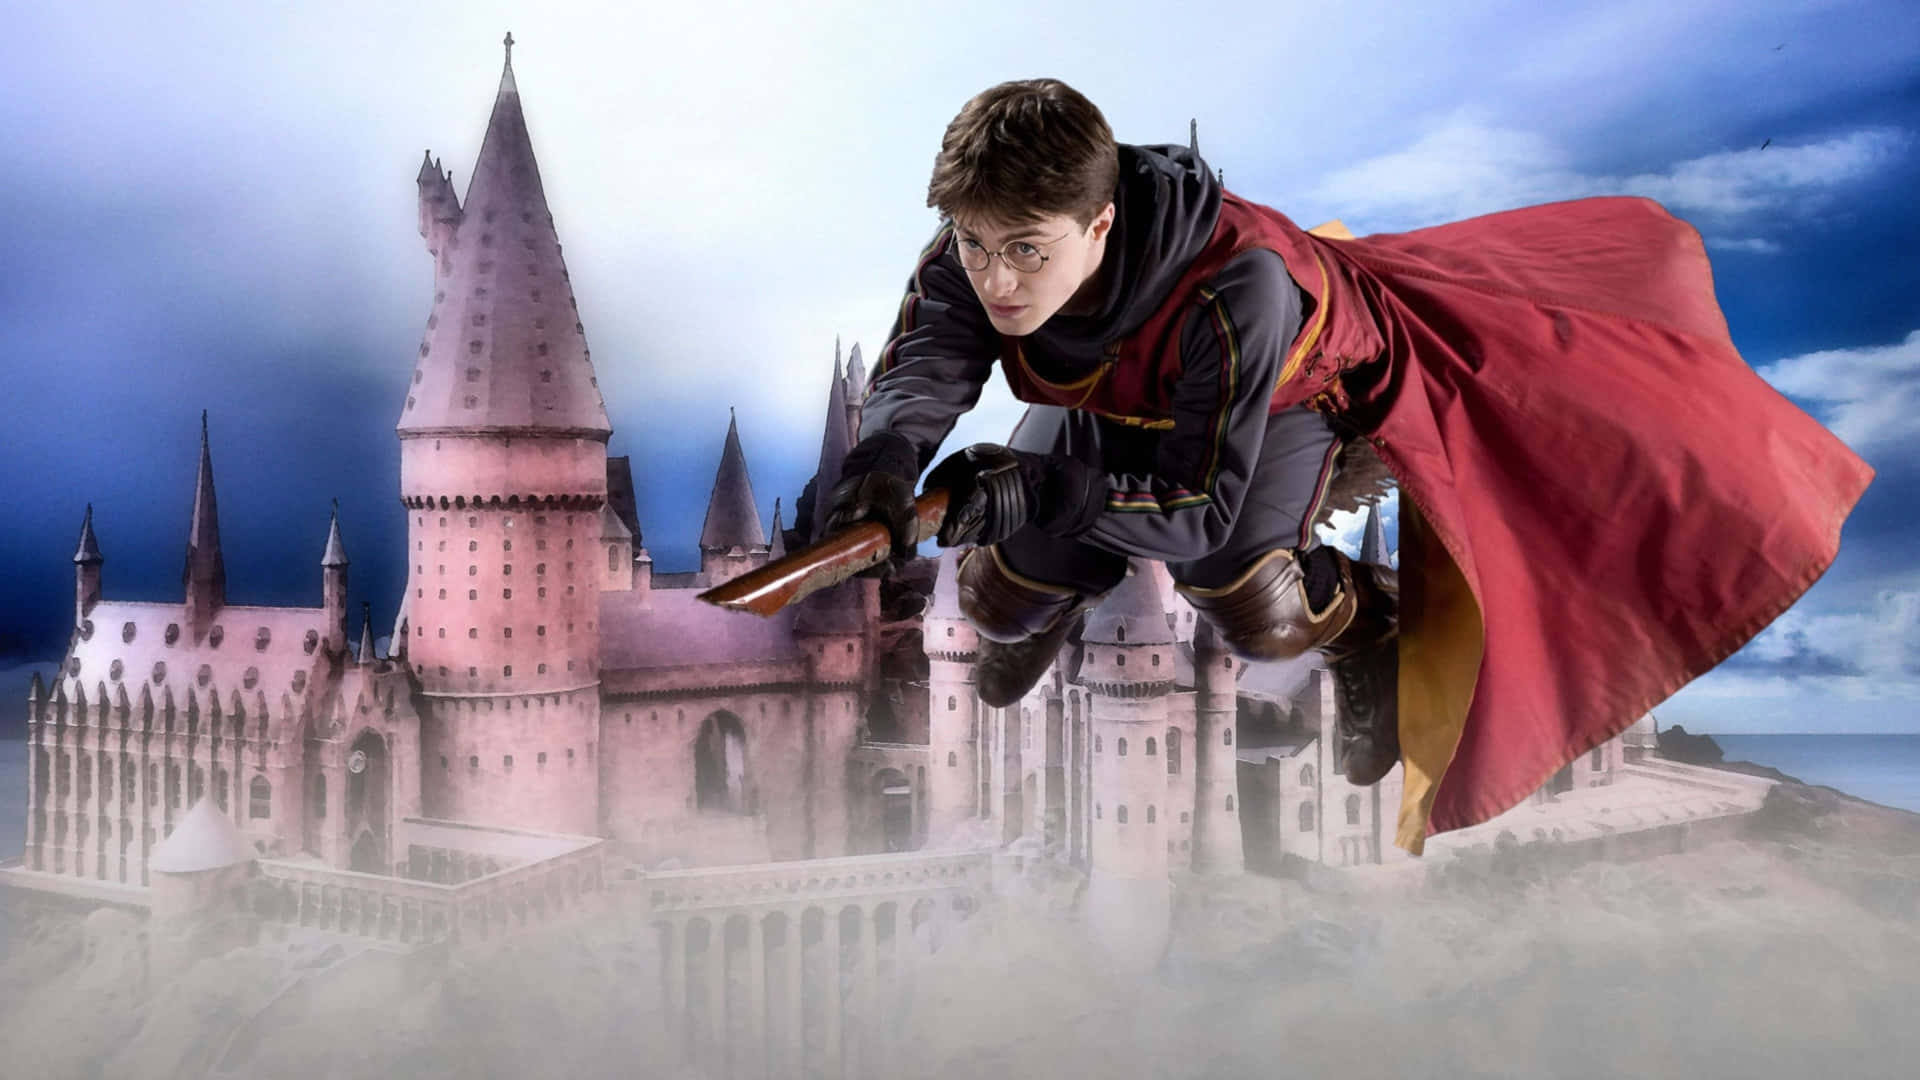 Join Harry Potter on his many adventures in magical 4K resolution" Wallpaper